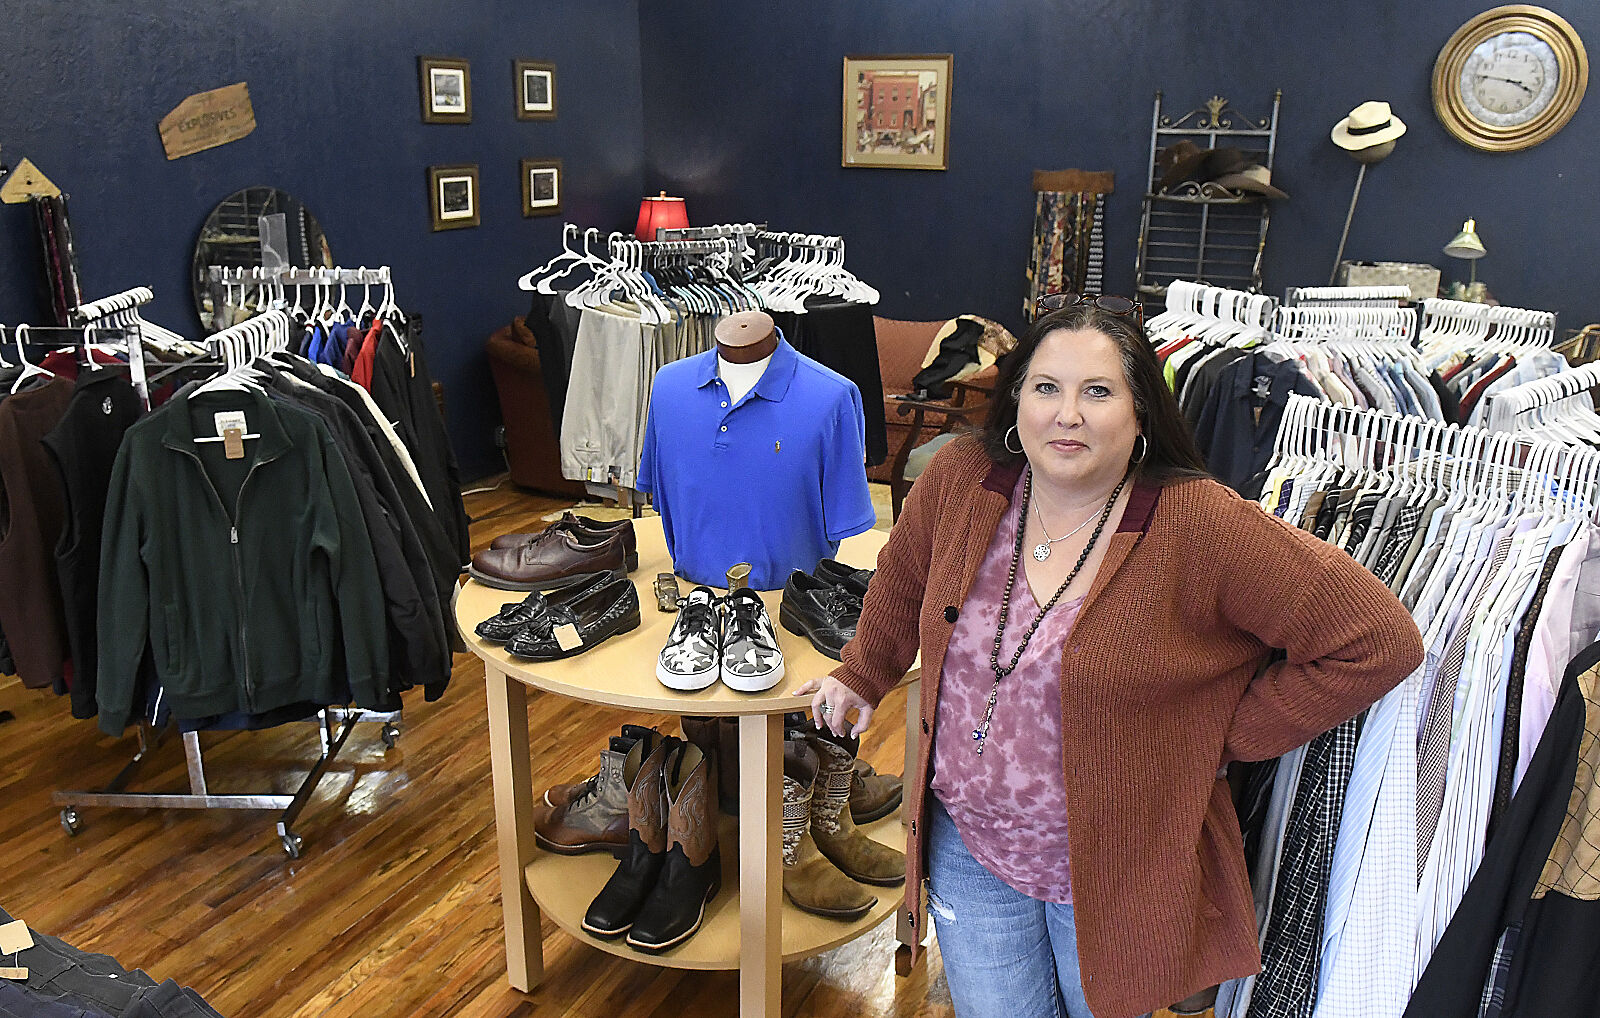 Men's consignment store opens downtown | News | enidnews.com